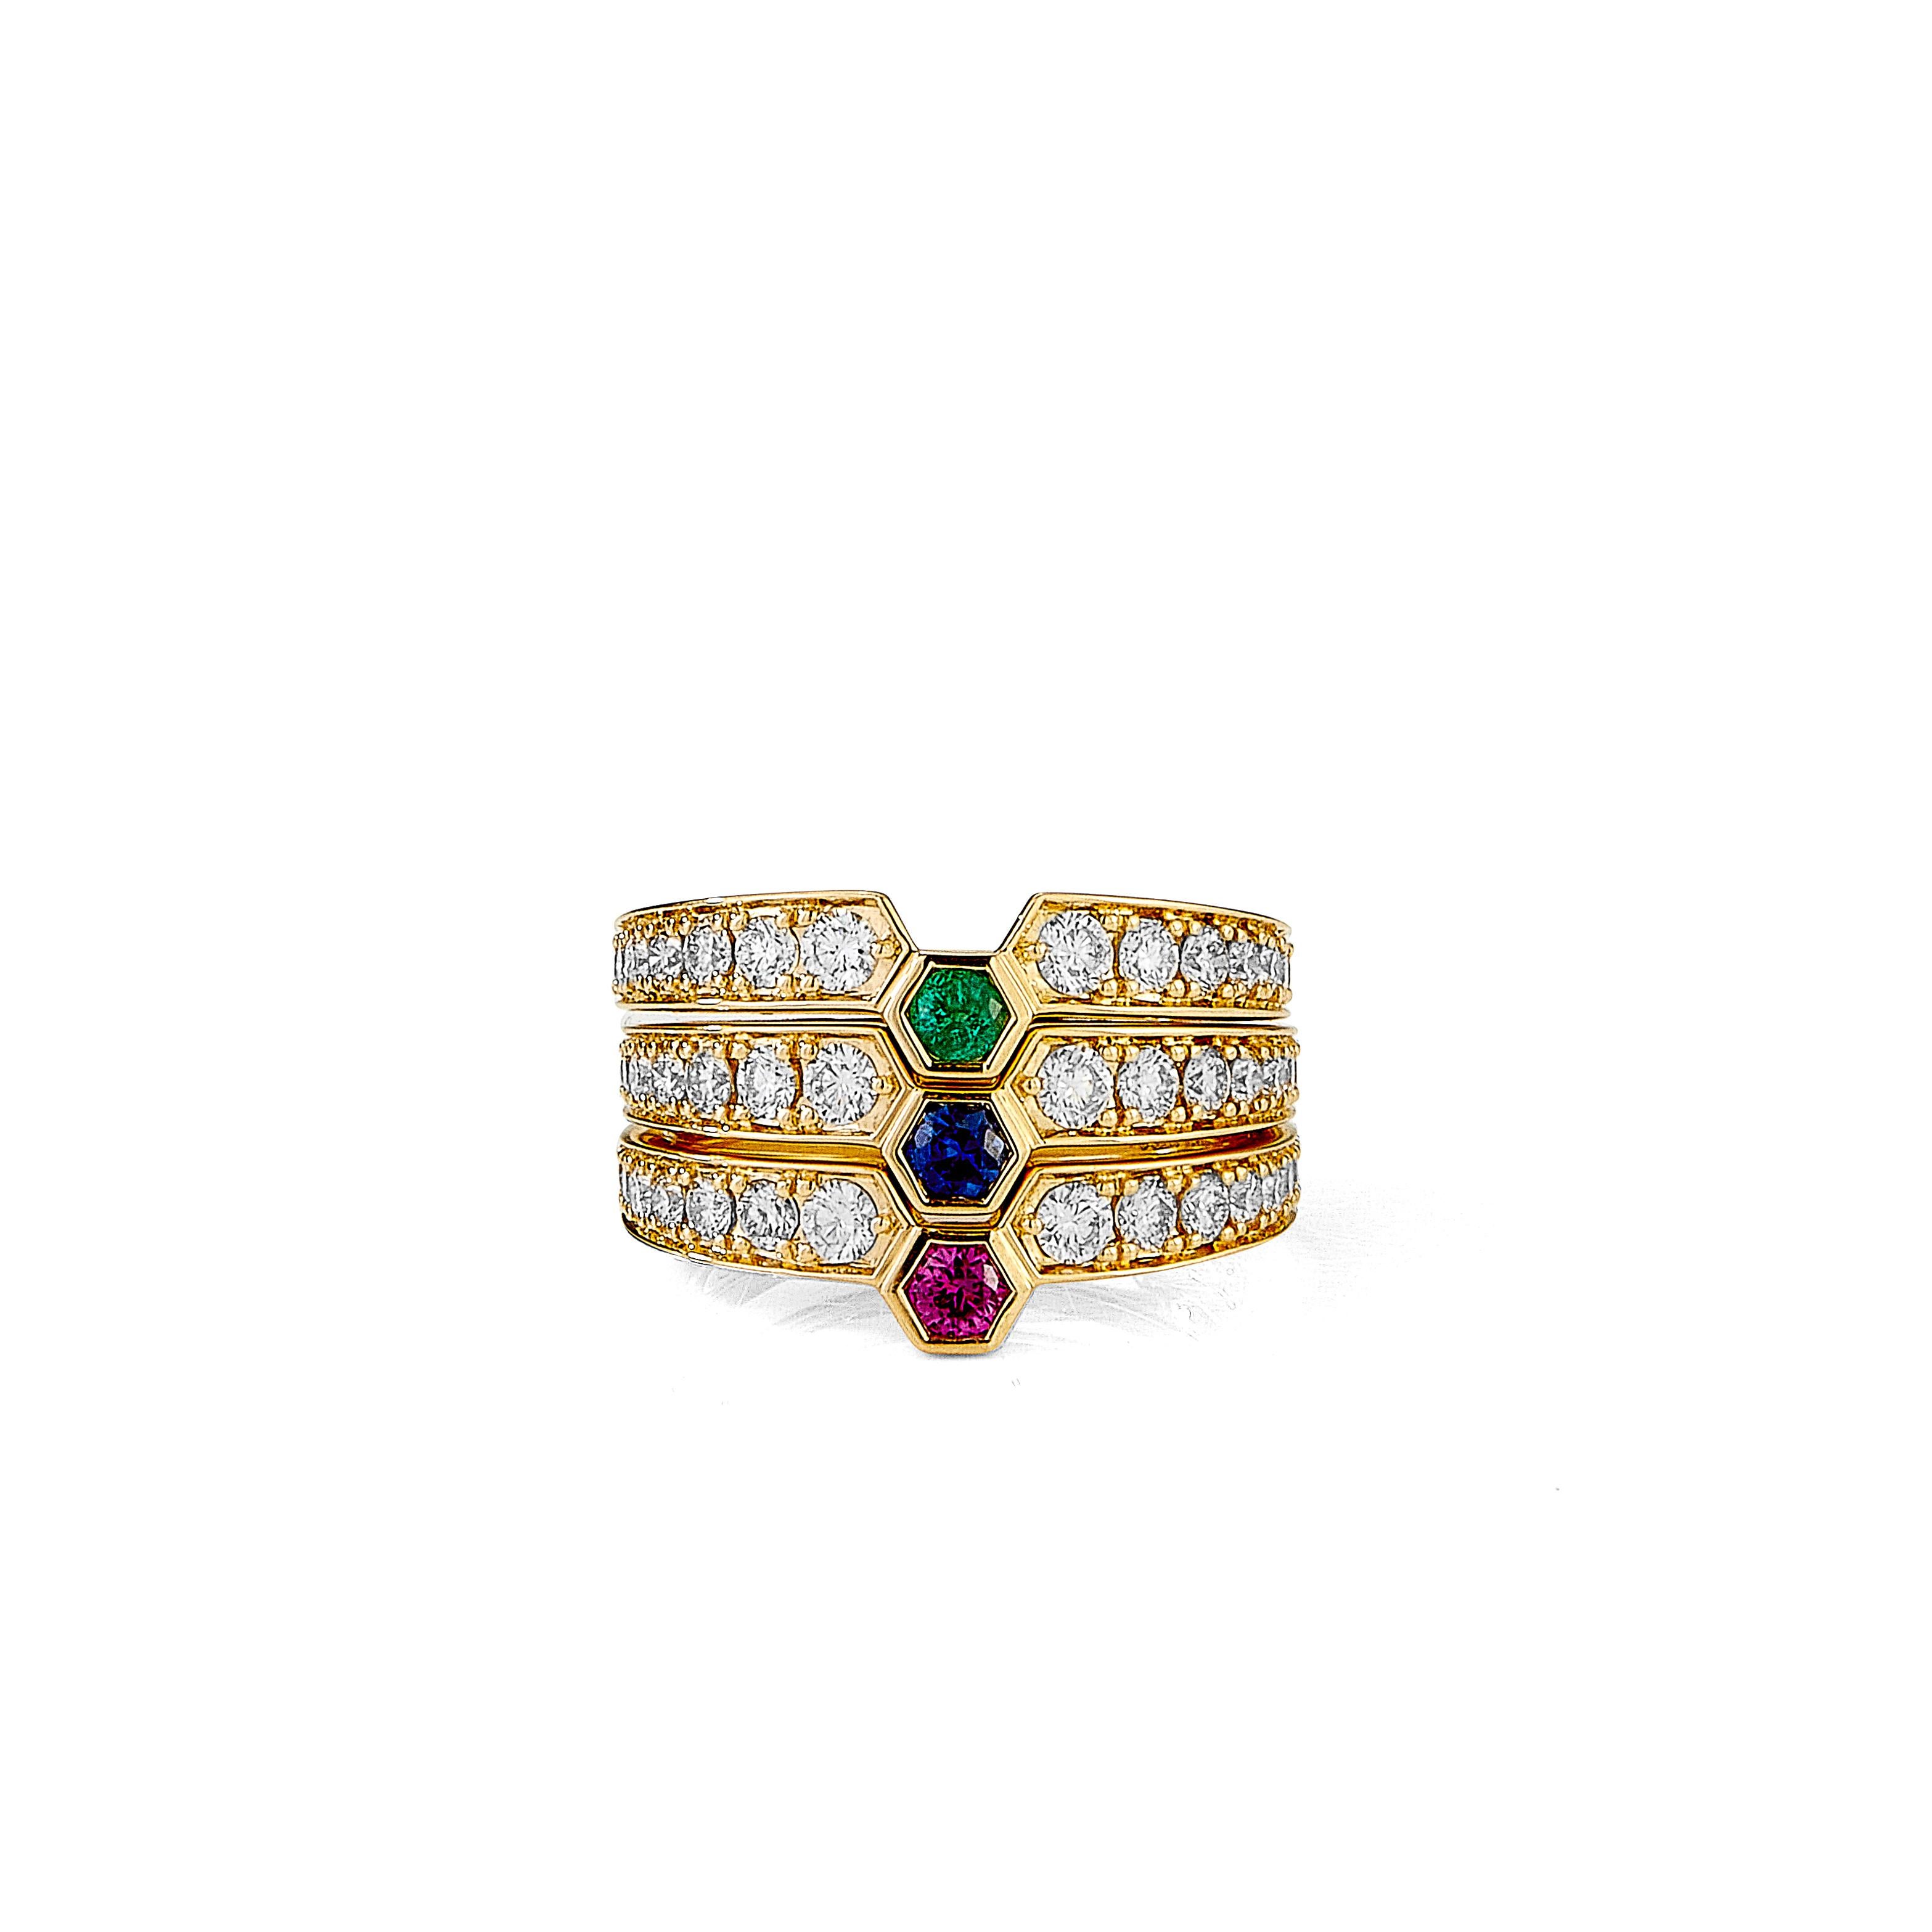 Created in 18 karat yellow gold
Ruby 0.10 carat approx.
Diamonds 0.50 carat approx.
Ring size US 7, can be resized

Crafted with 18 karat yellow gold and featuring a ruby of approximately 0.10 carats and diamonds totaling around 0.50 carats, this